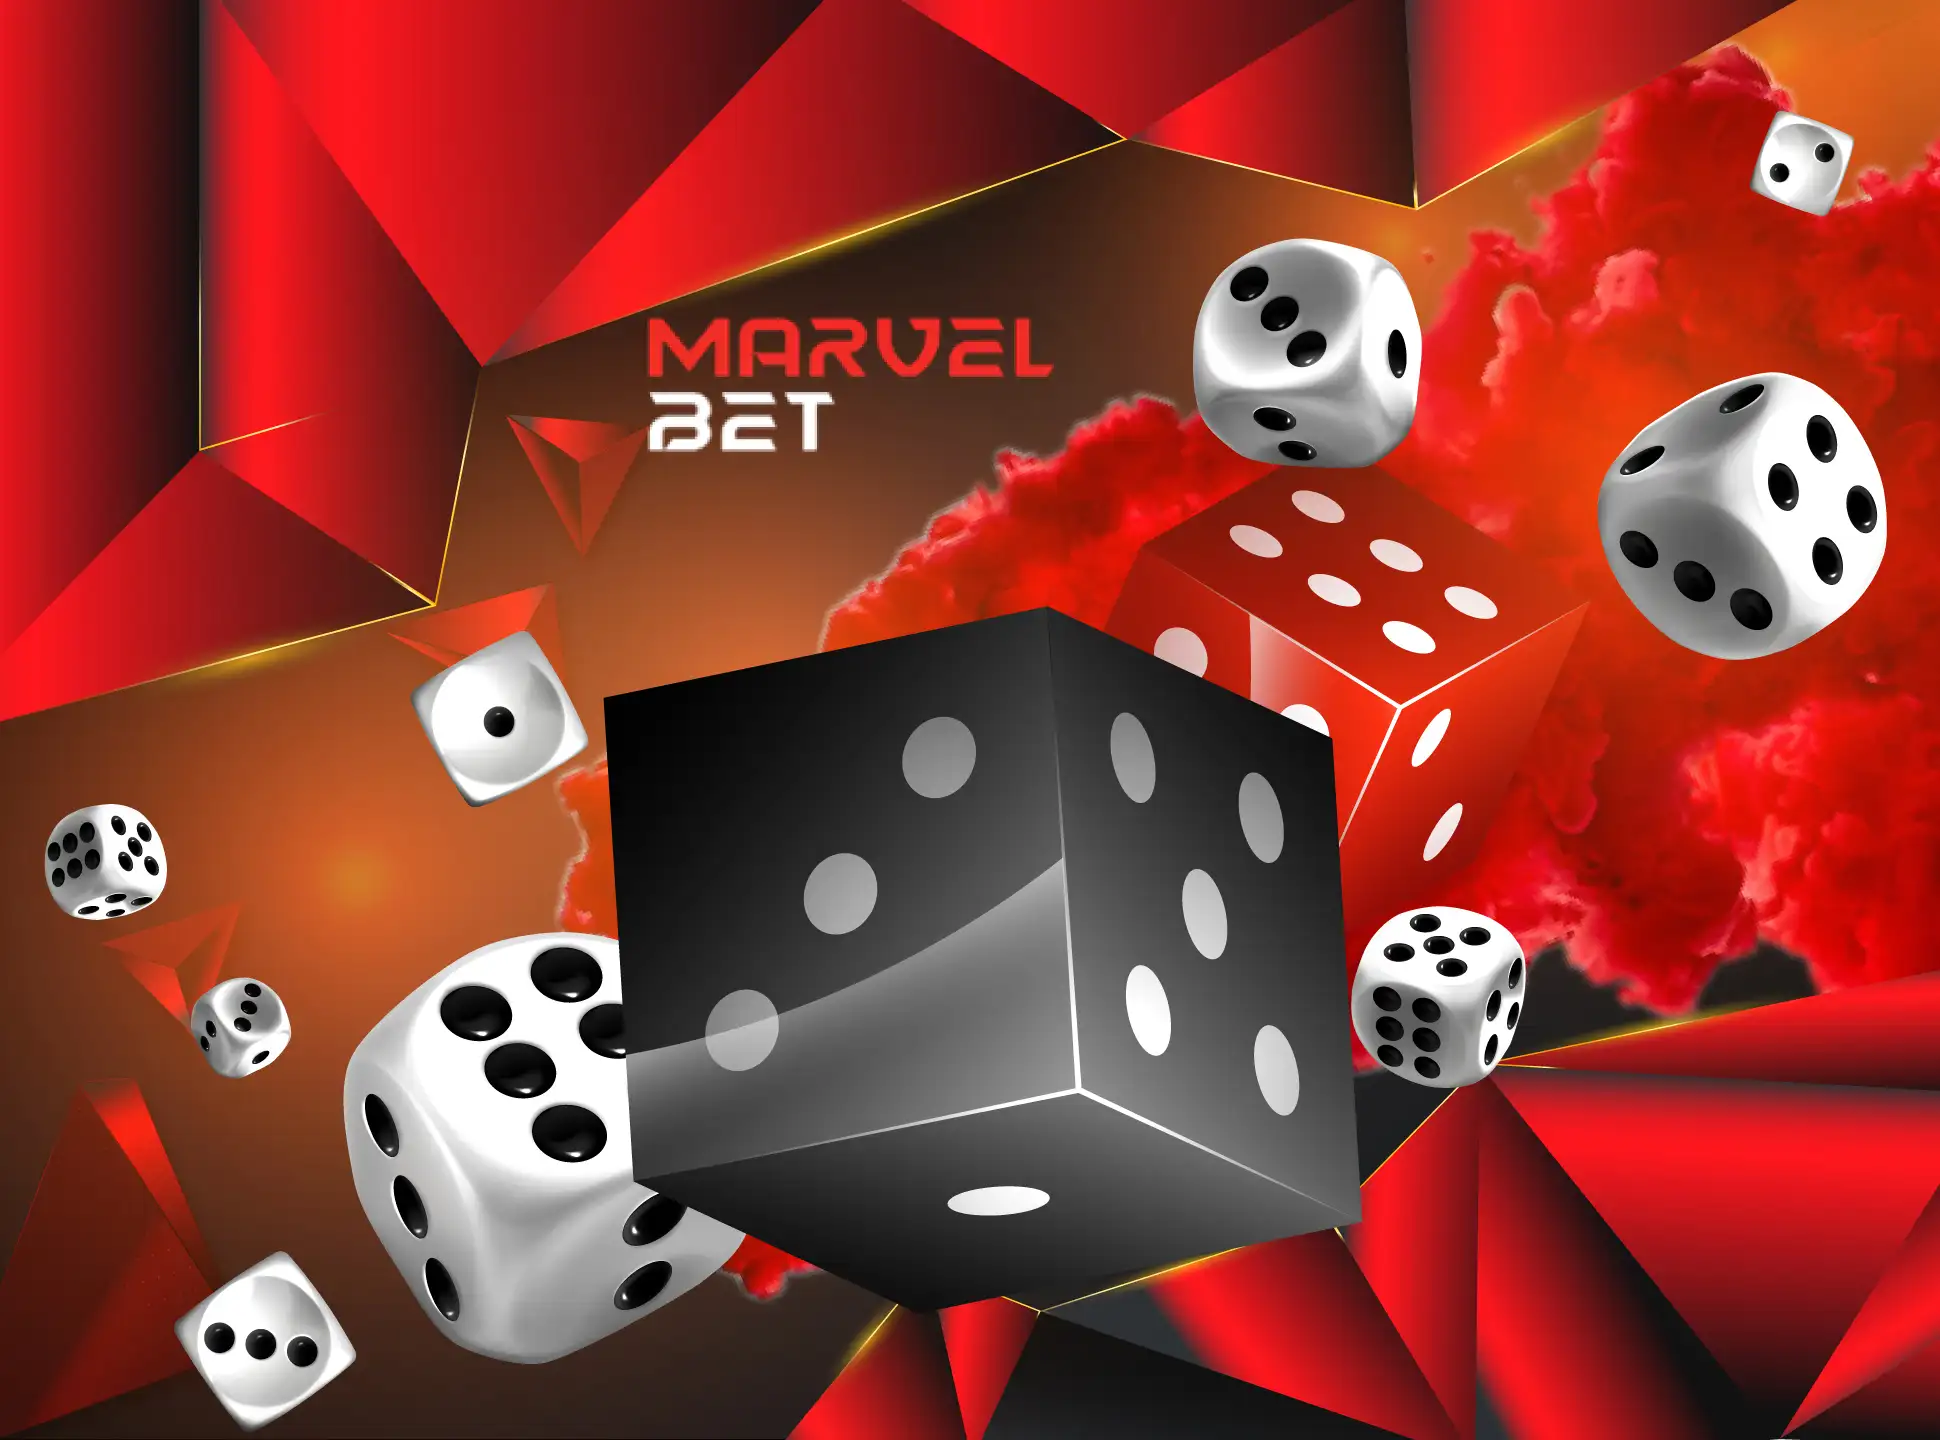 Sic Bo is a traditional dice game that can be played at MarvelBet.